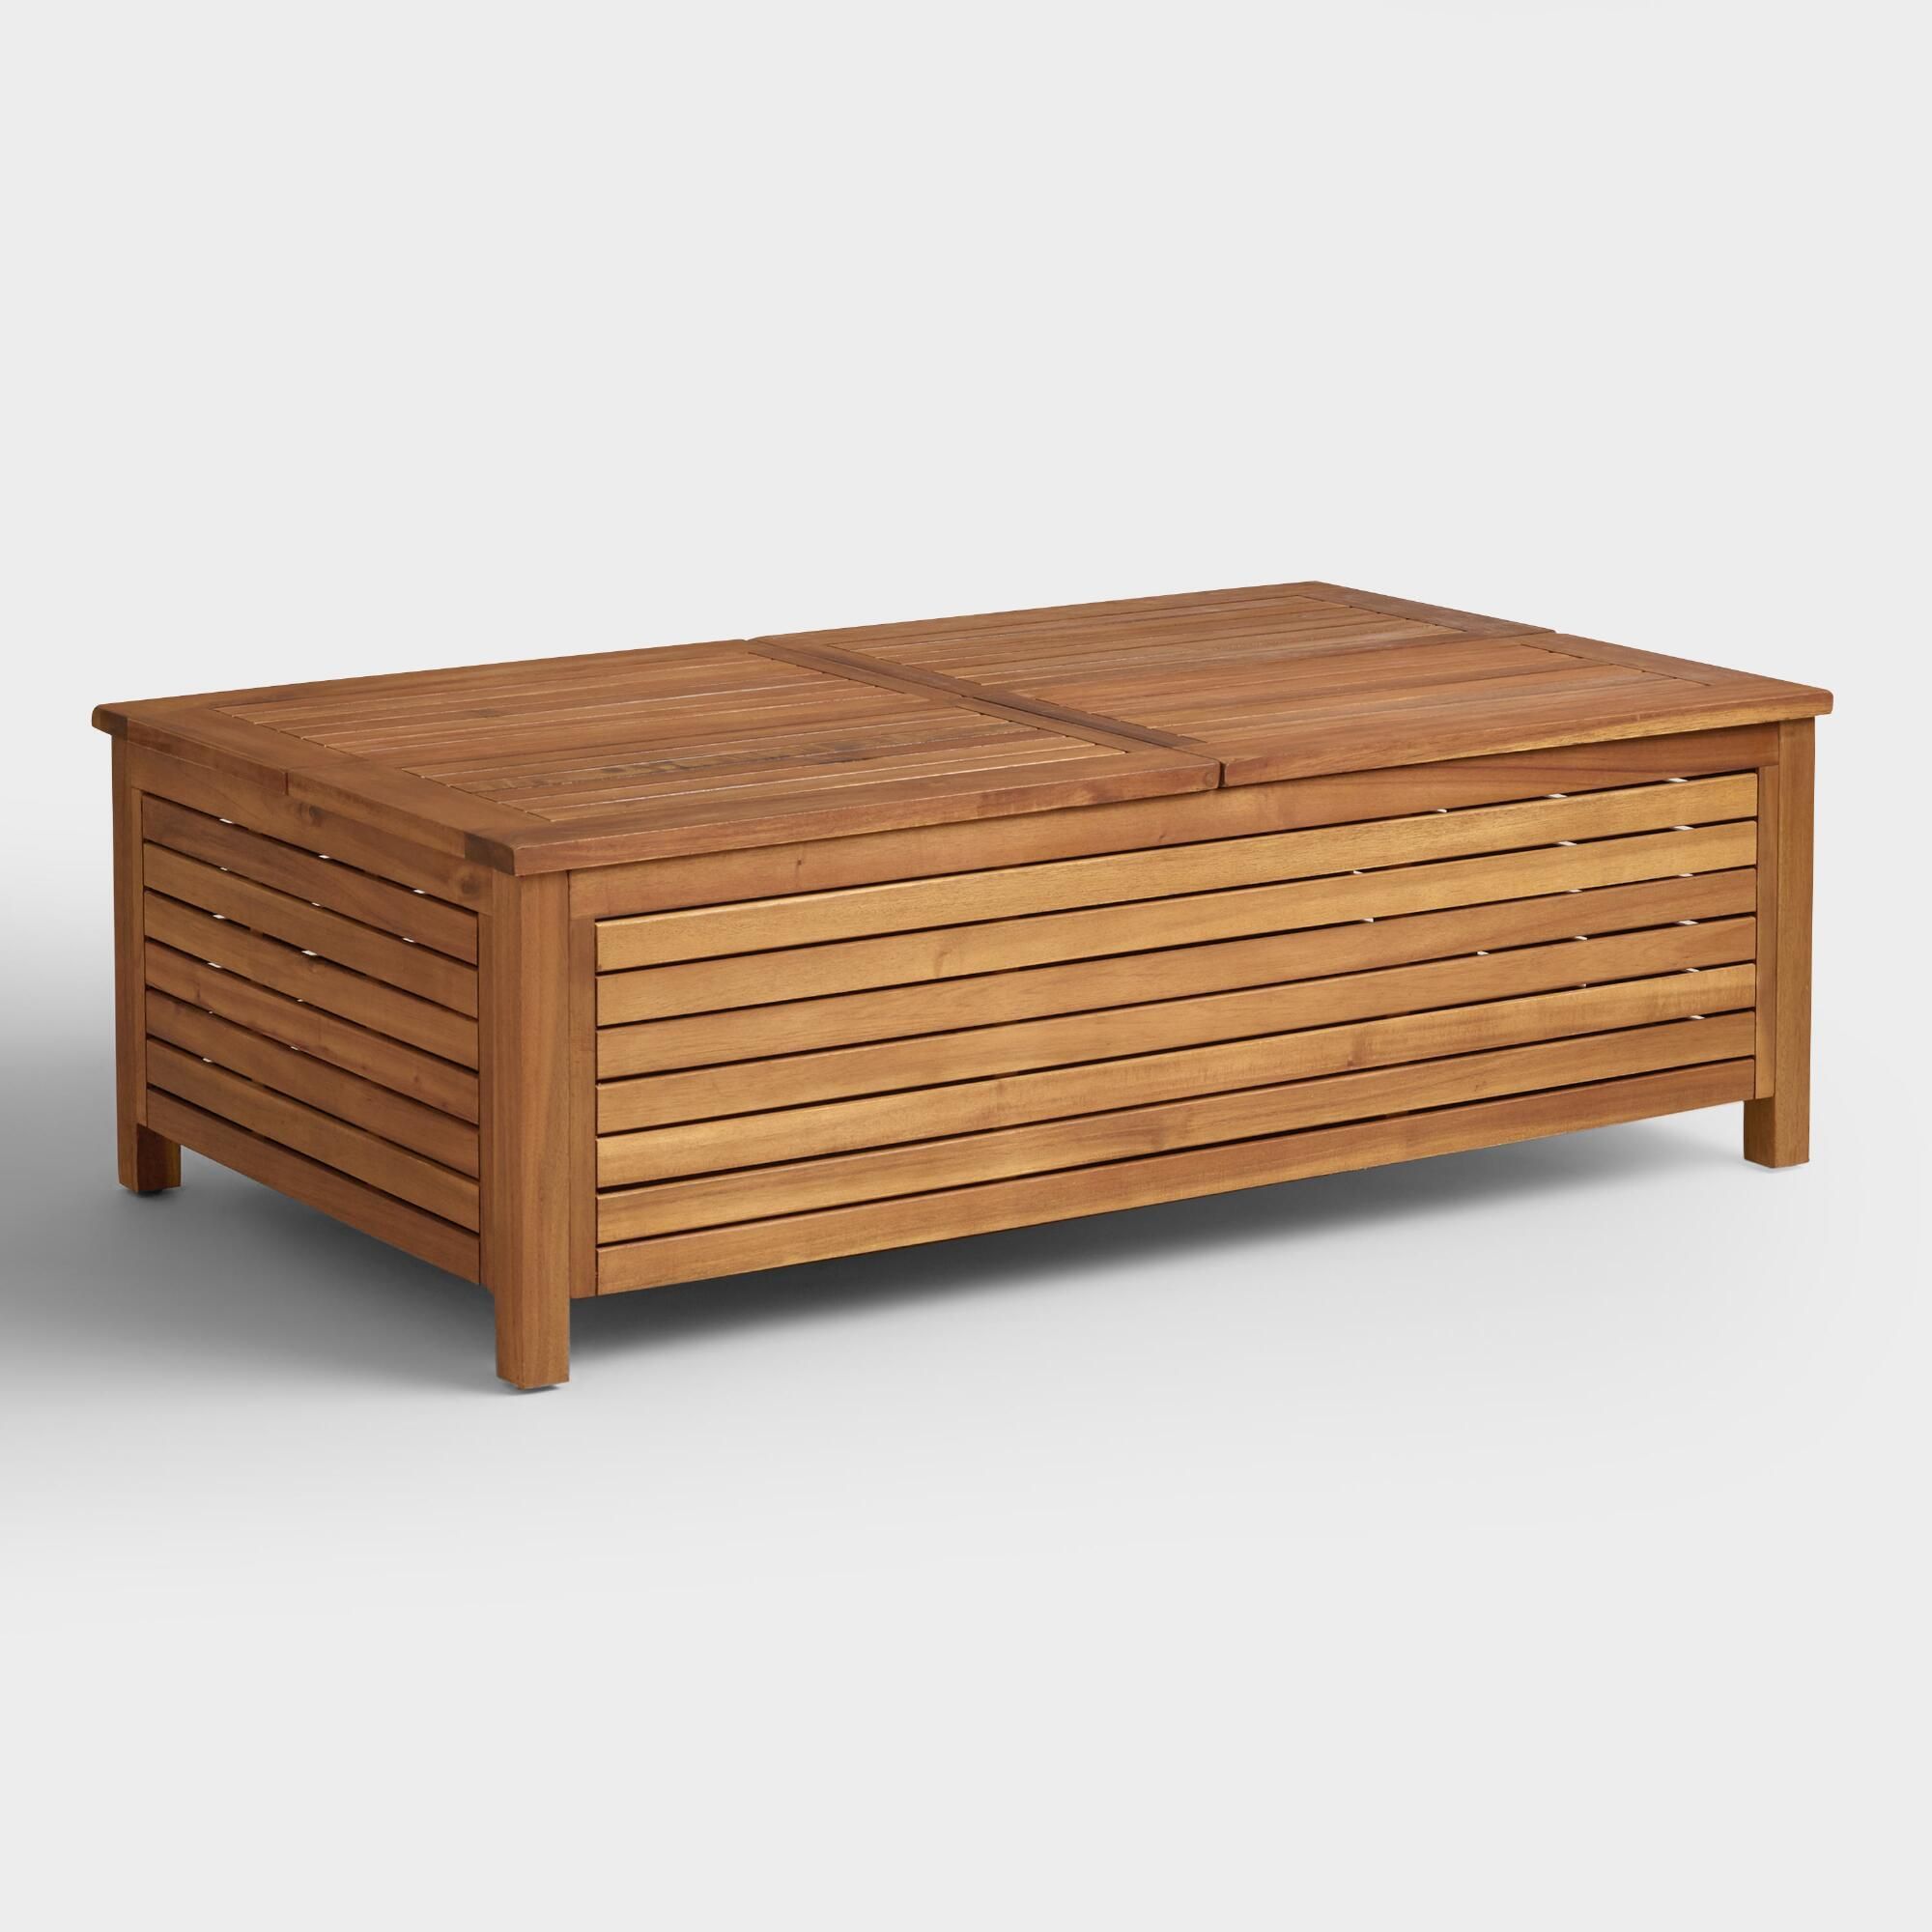 The Bold Beauty Of Our Occasional Collection Comes From Solid Acacia Regarding Outdoor Coffee Tables With Storage (View 5 of 20)